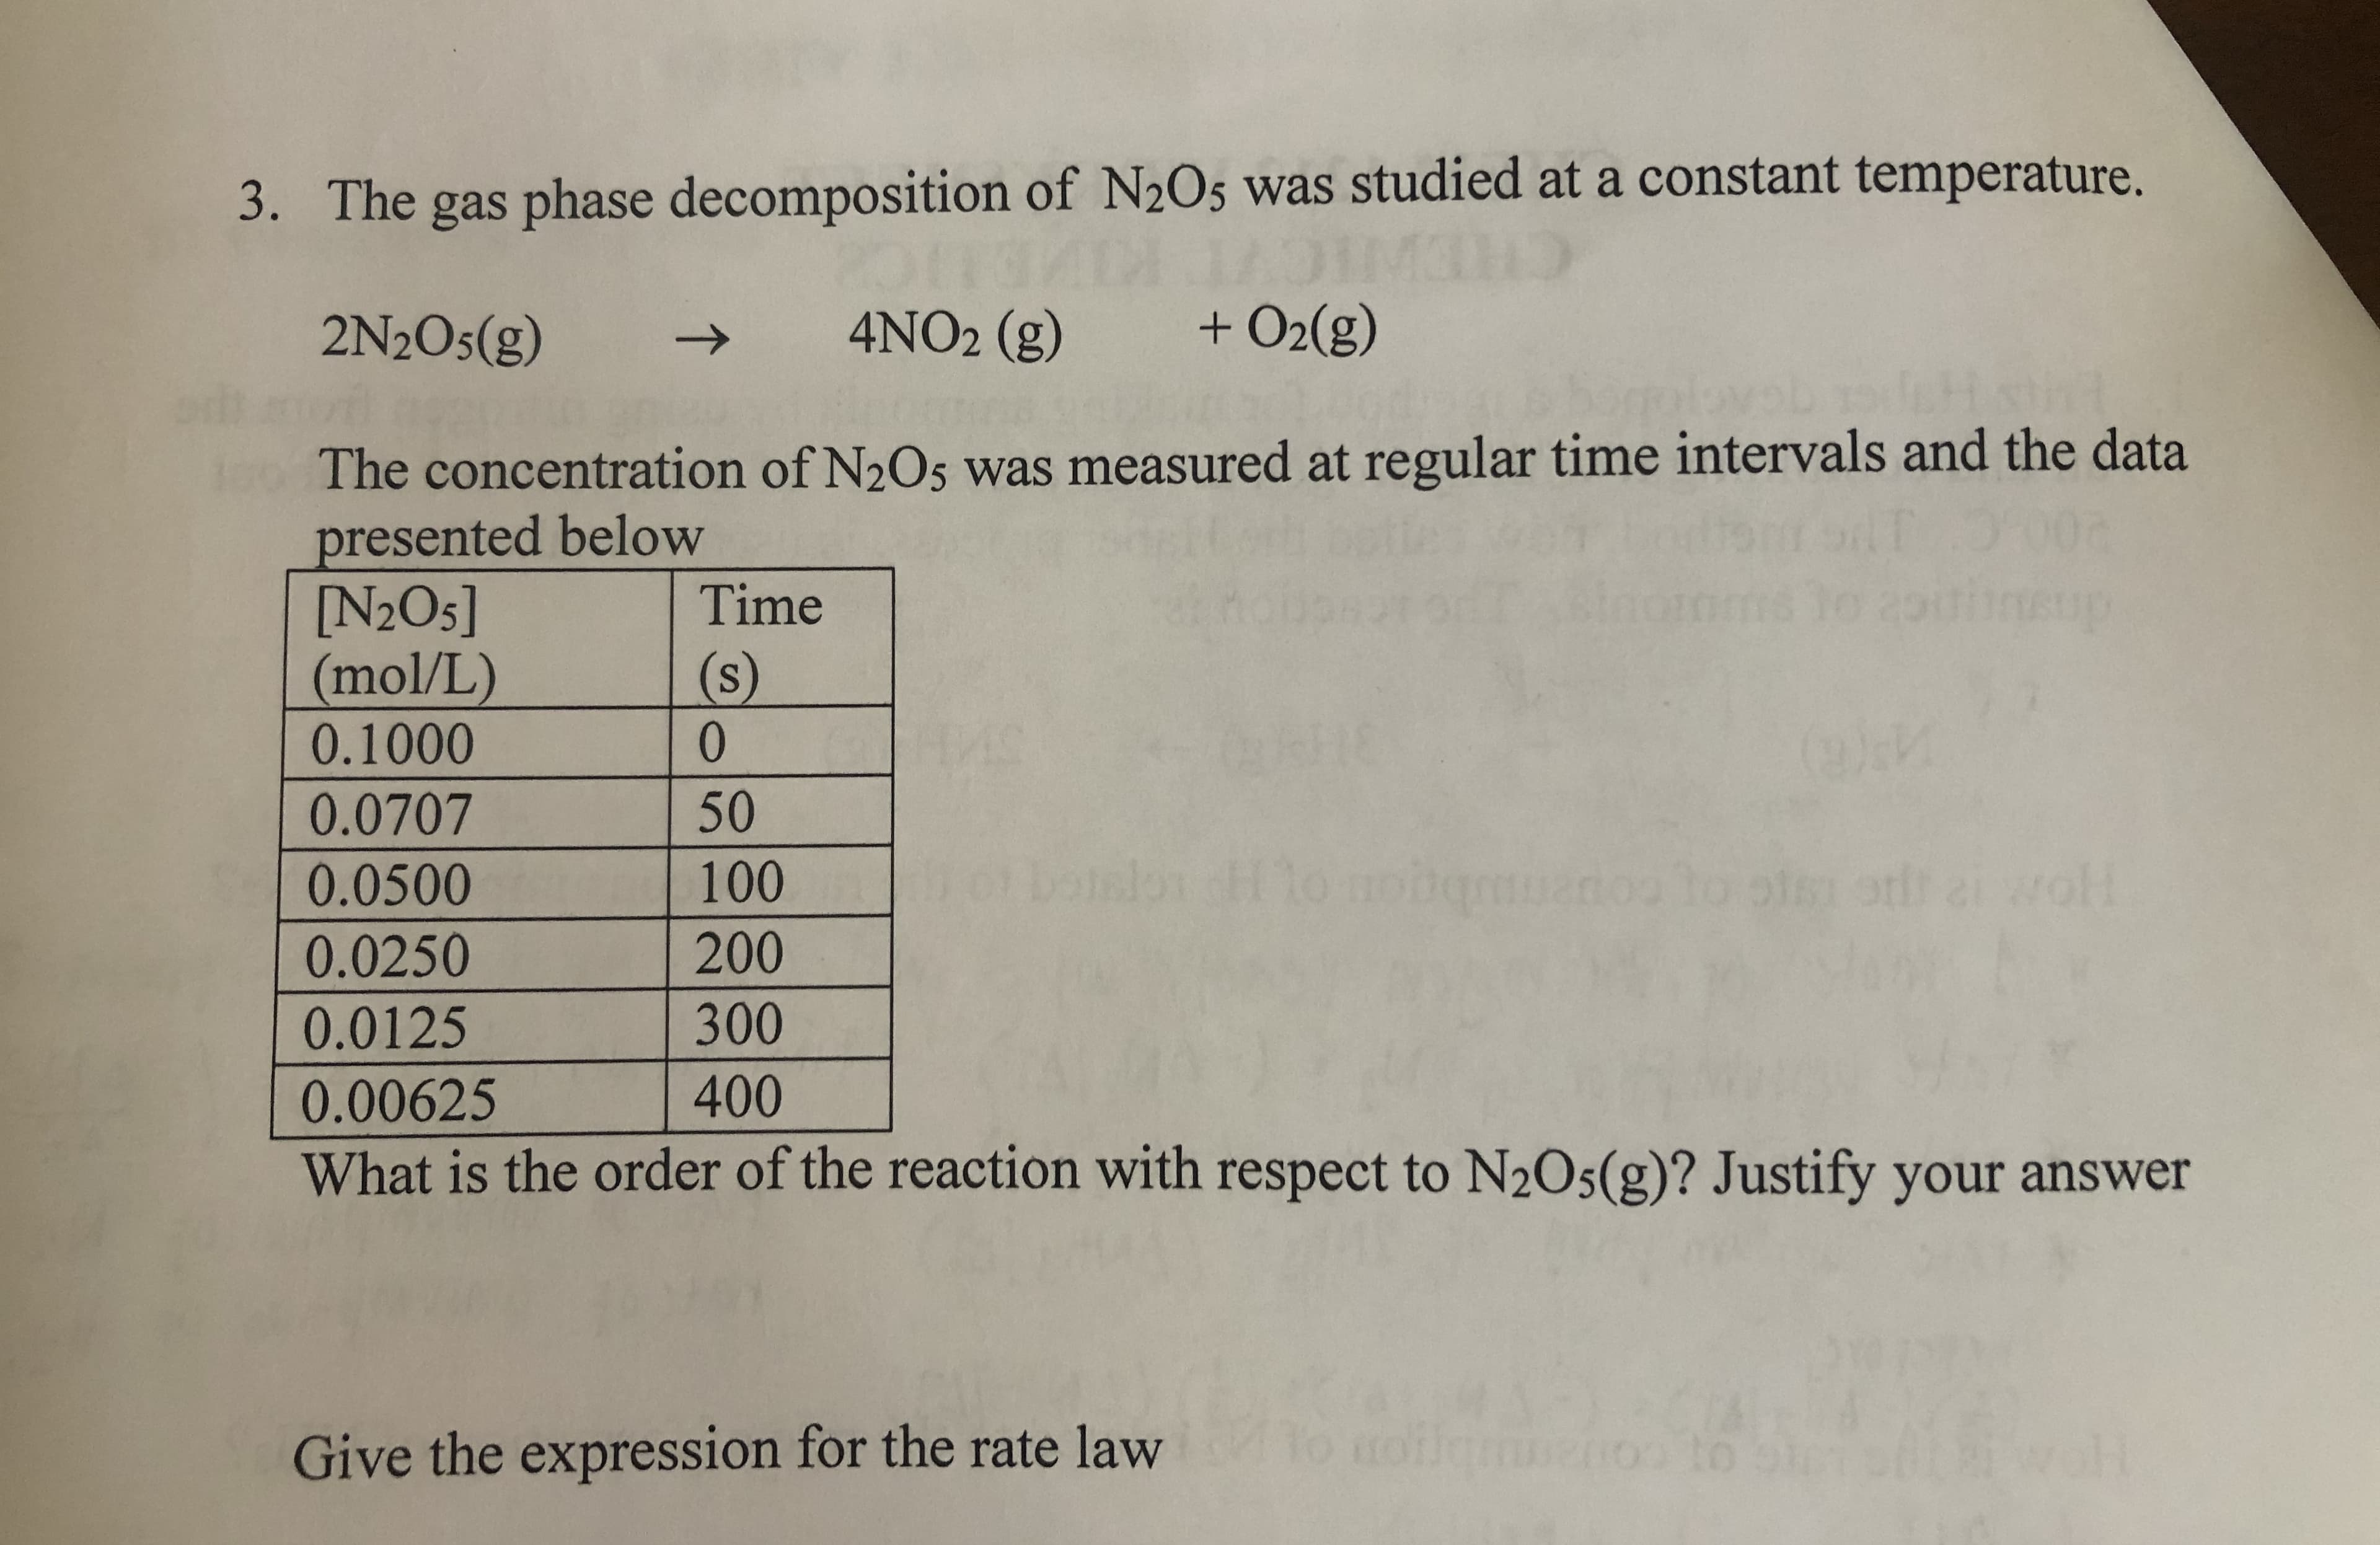 3. The gas phase decomposition of N2O5 was studied at a constant temperature.
2N2O5(g)
4NO2 (g)
+ O2(g)
->
and
100 The concentration of N2O5 was measured at regular time intervals and the data
presented below
[N2O5]
(mol/L)
0.1000
Time
(s)
0.
0.0707
50
0.0500
100
wll
0.0250
200
0.0125
300
0.00625
400
What is the order of the reaction with respect to N2O5(g)? Justify your answer
Give the expression for the rate law
Jamnenoo to
